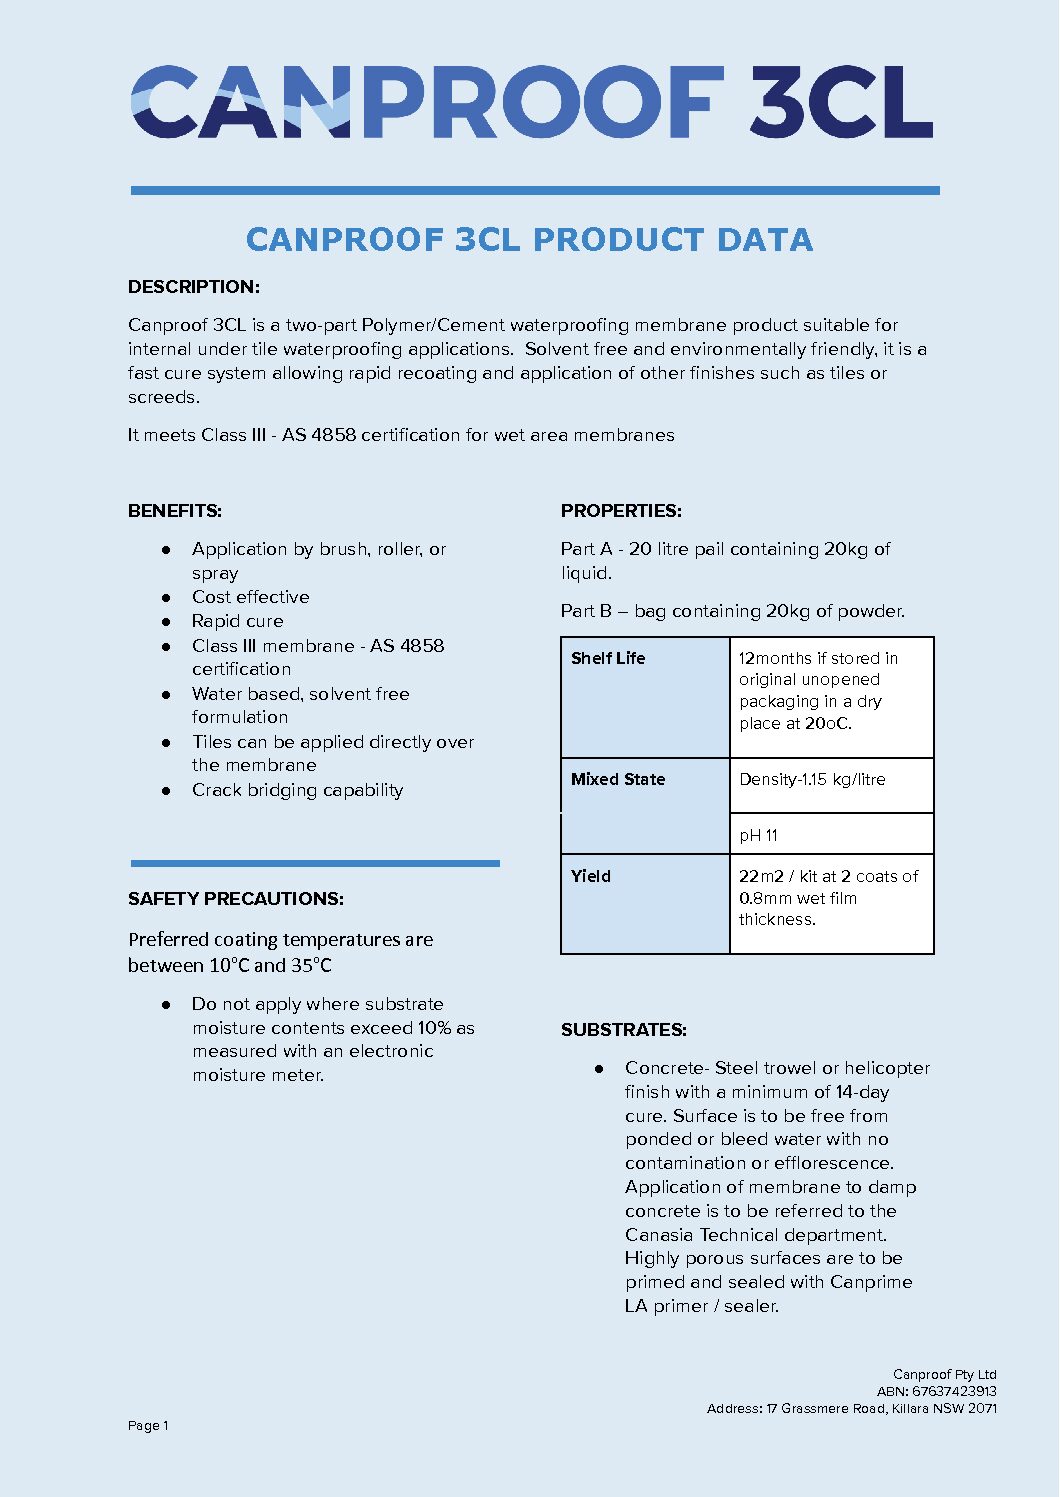 Canproof 3CL TDS